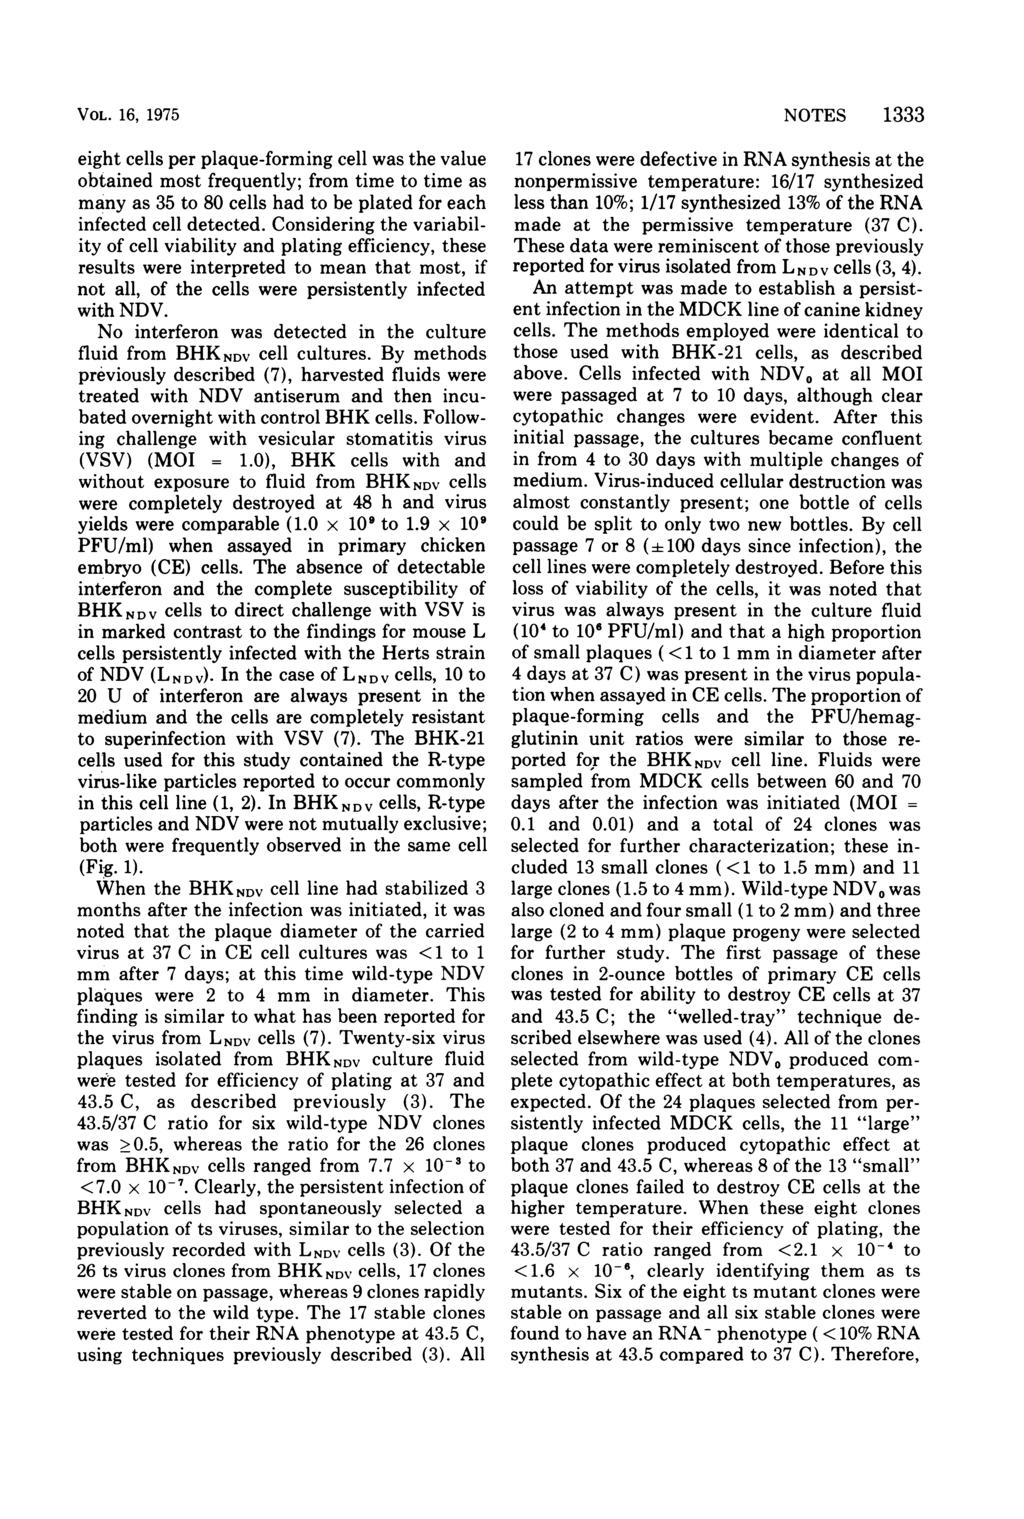 VOL. 16, 1975 eight cells per plaque-forming cell was the value obtained most frequently; from time to time as many as 35 to 80 cells had to be plated for each infected cell detected.